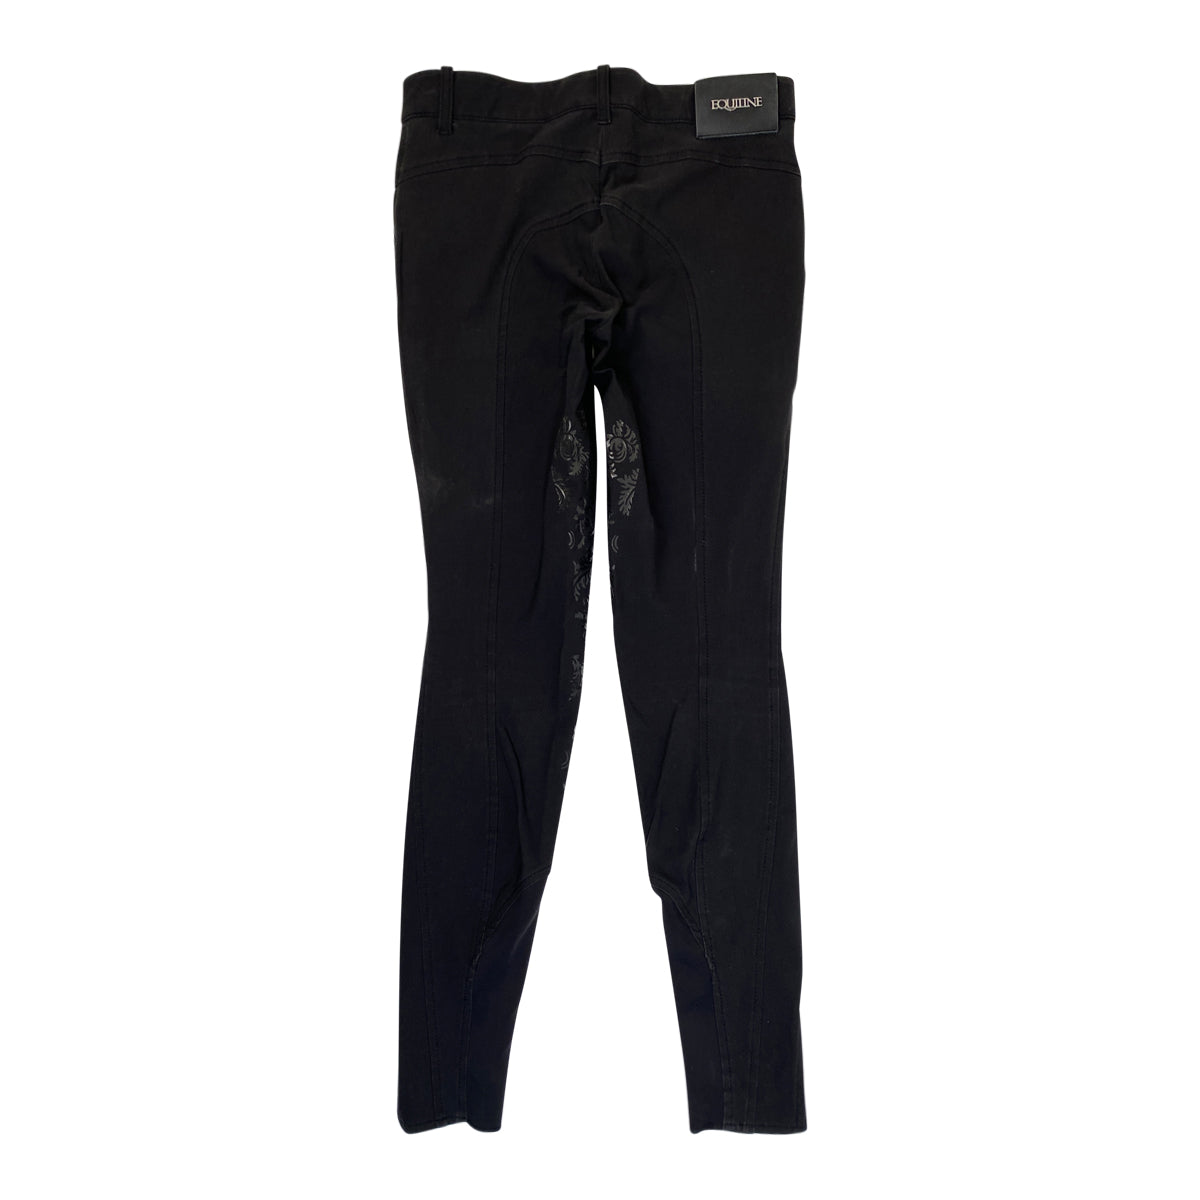 Equiline 'G-Zone' Breeches in Black Florals